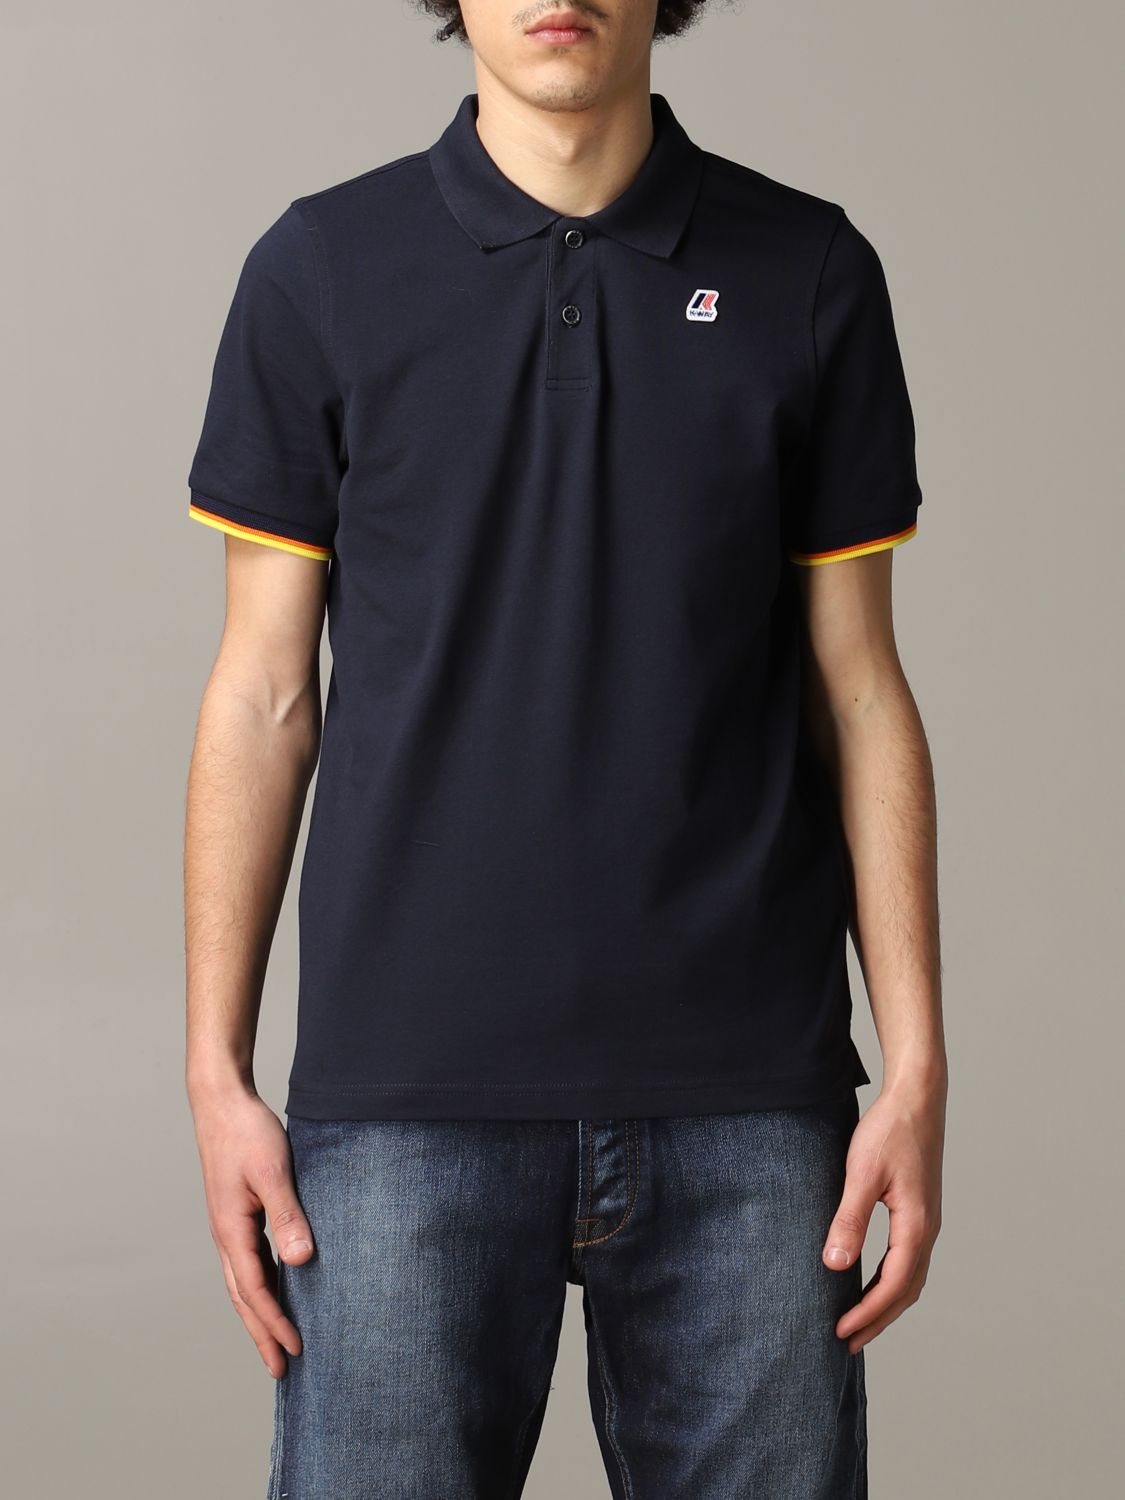 K-Way Outlet: polo shirt for man - Navy | K-Way polo shirt K008J50 ...